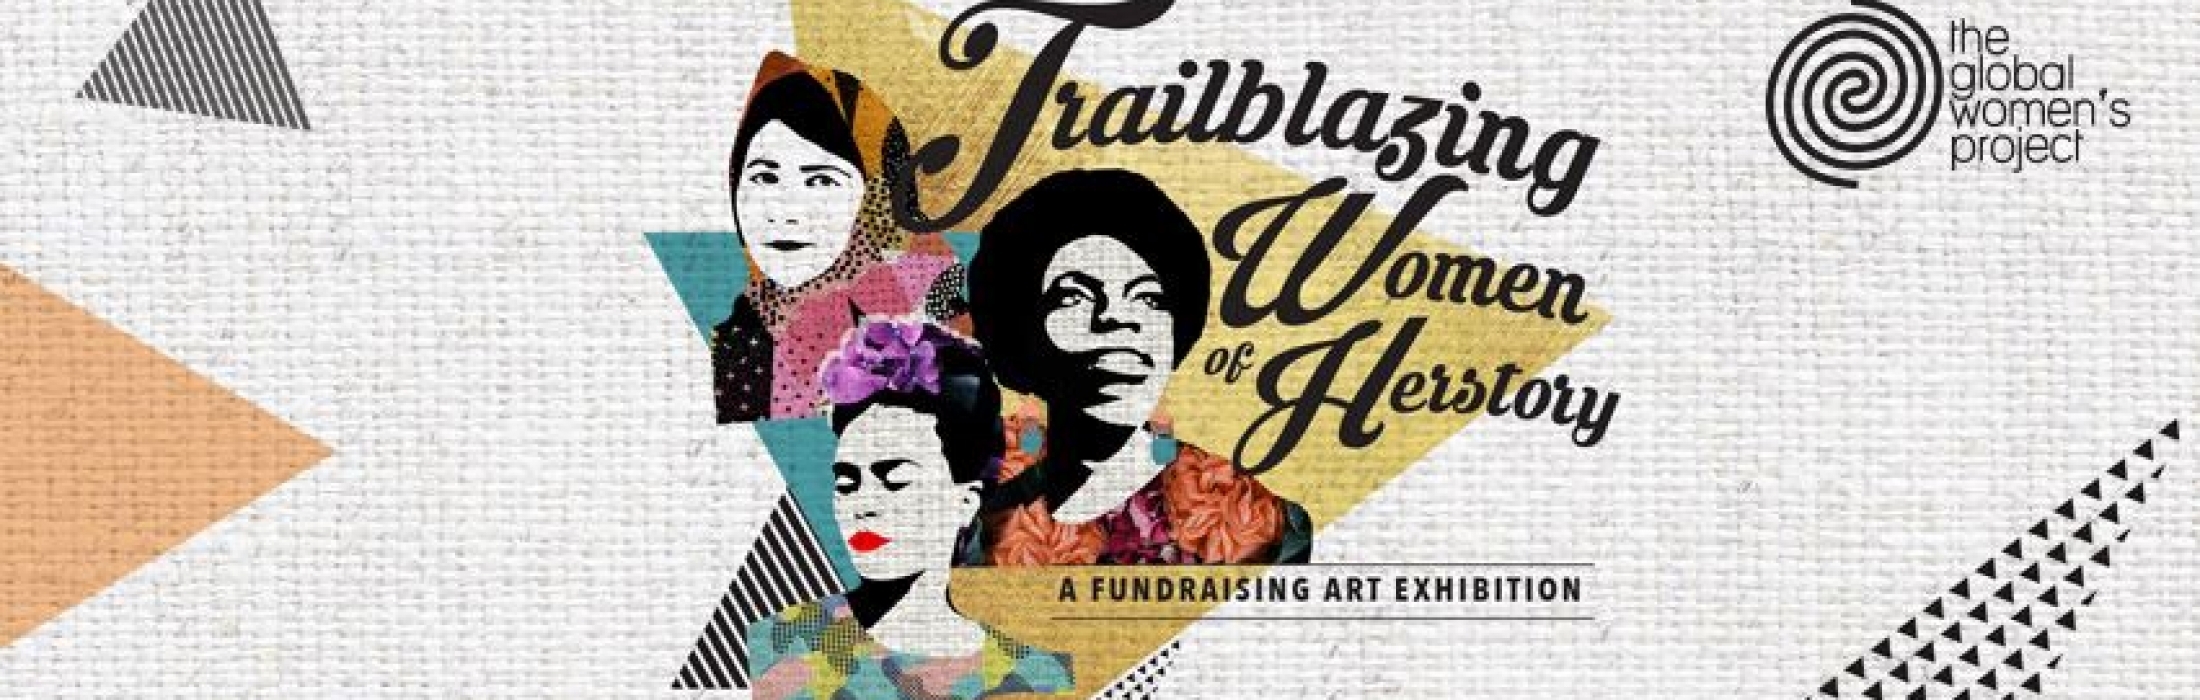 Trailblazing Women Of Herstory Exhibition | Presented by The Global Women’s Project